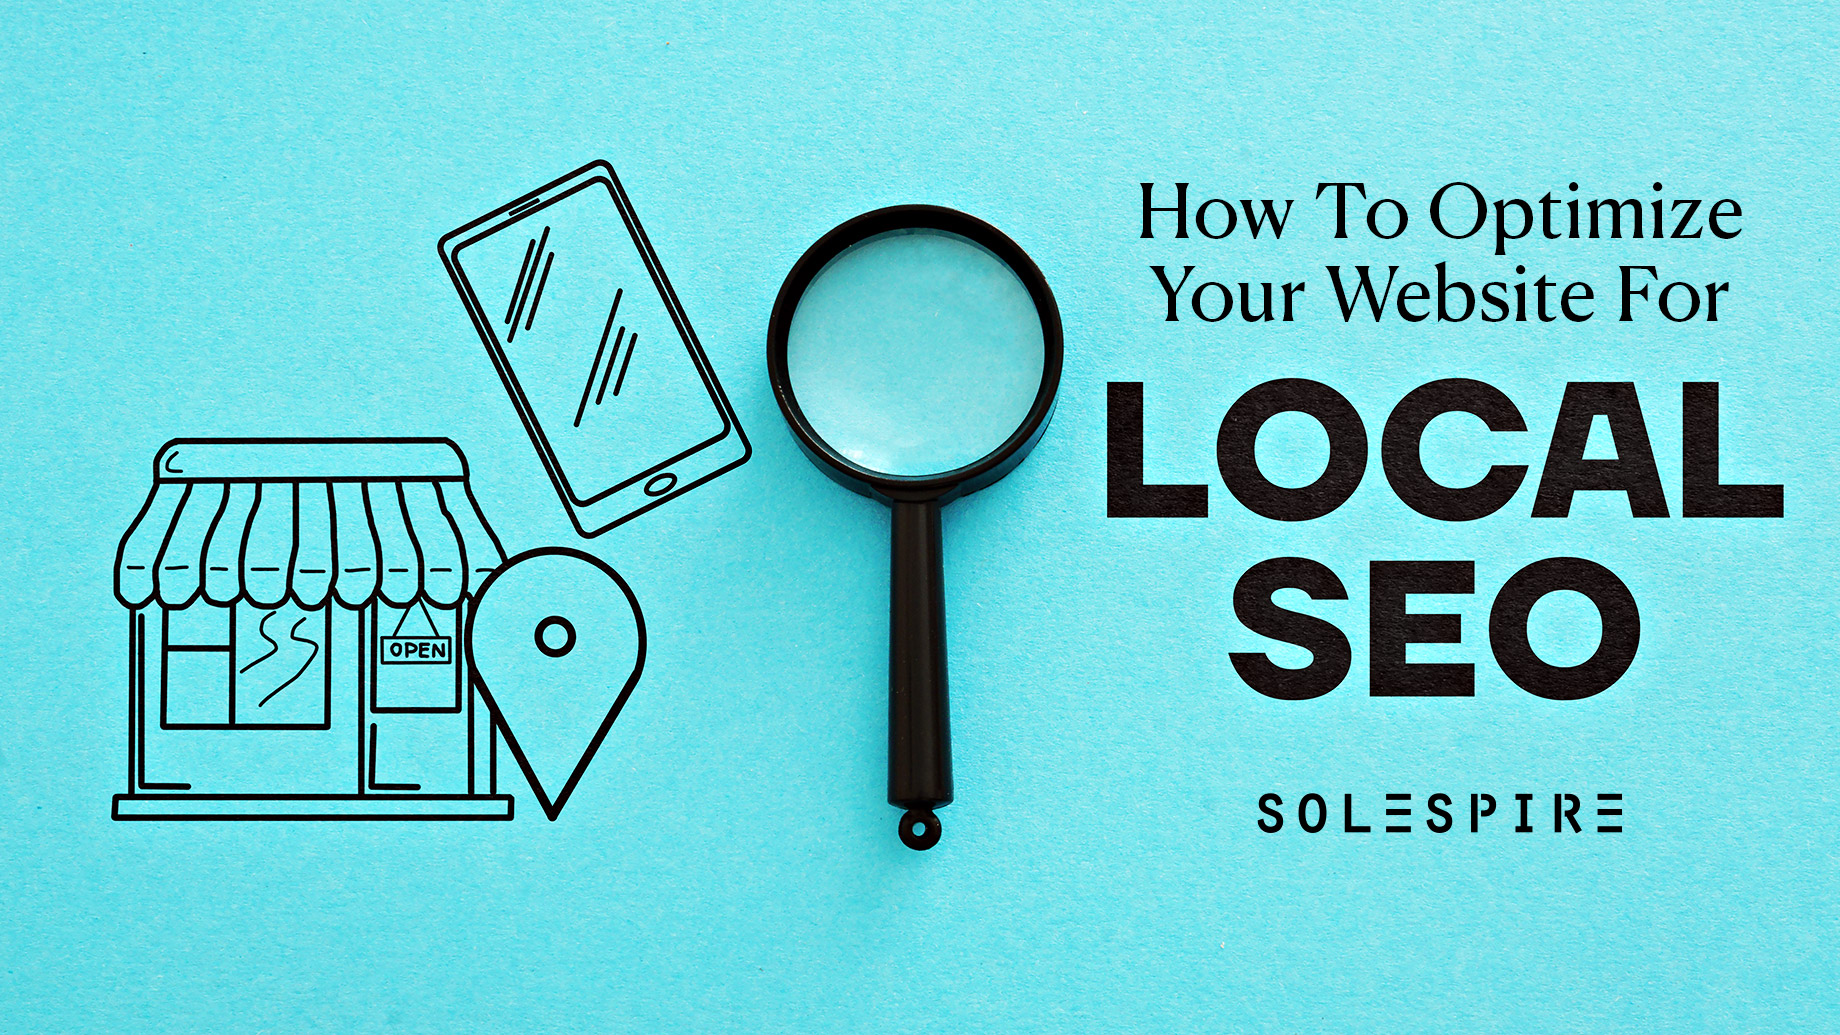 How To Optimize Your Website For Local SEO